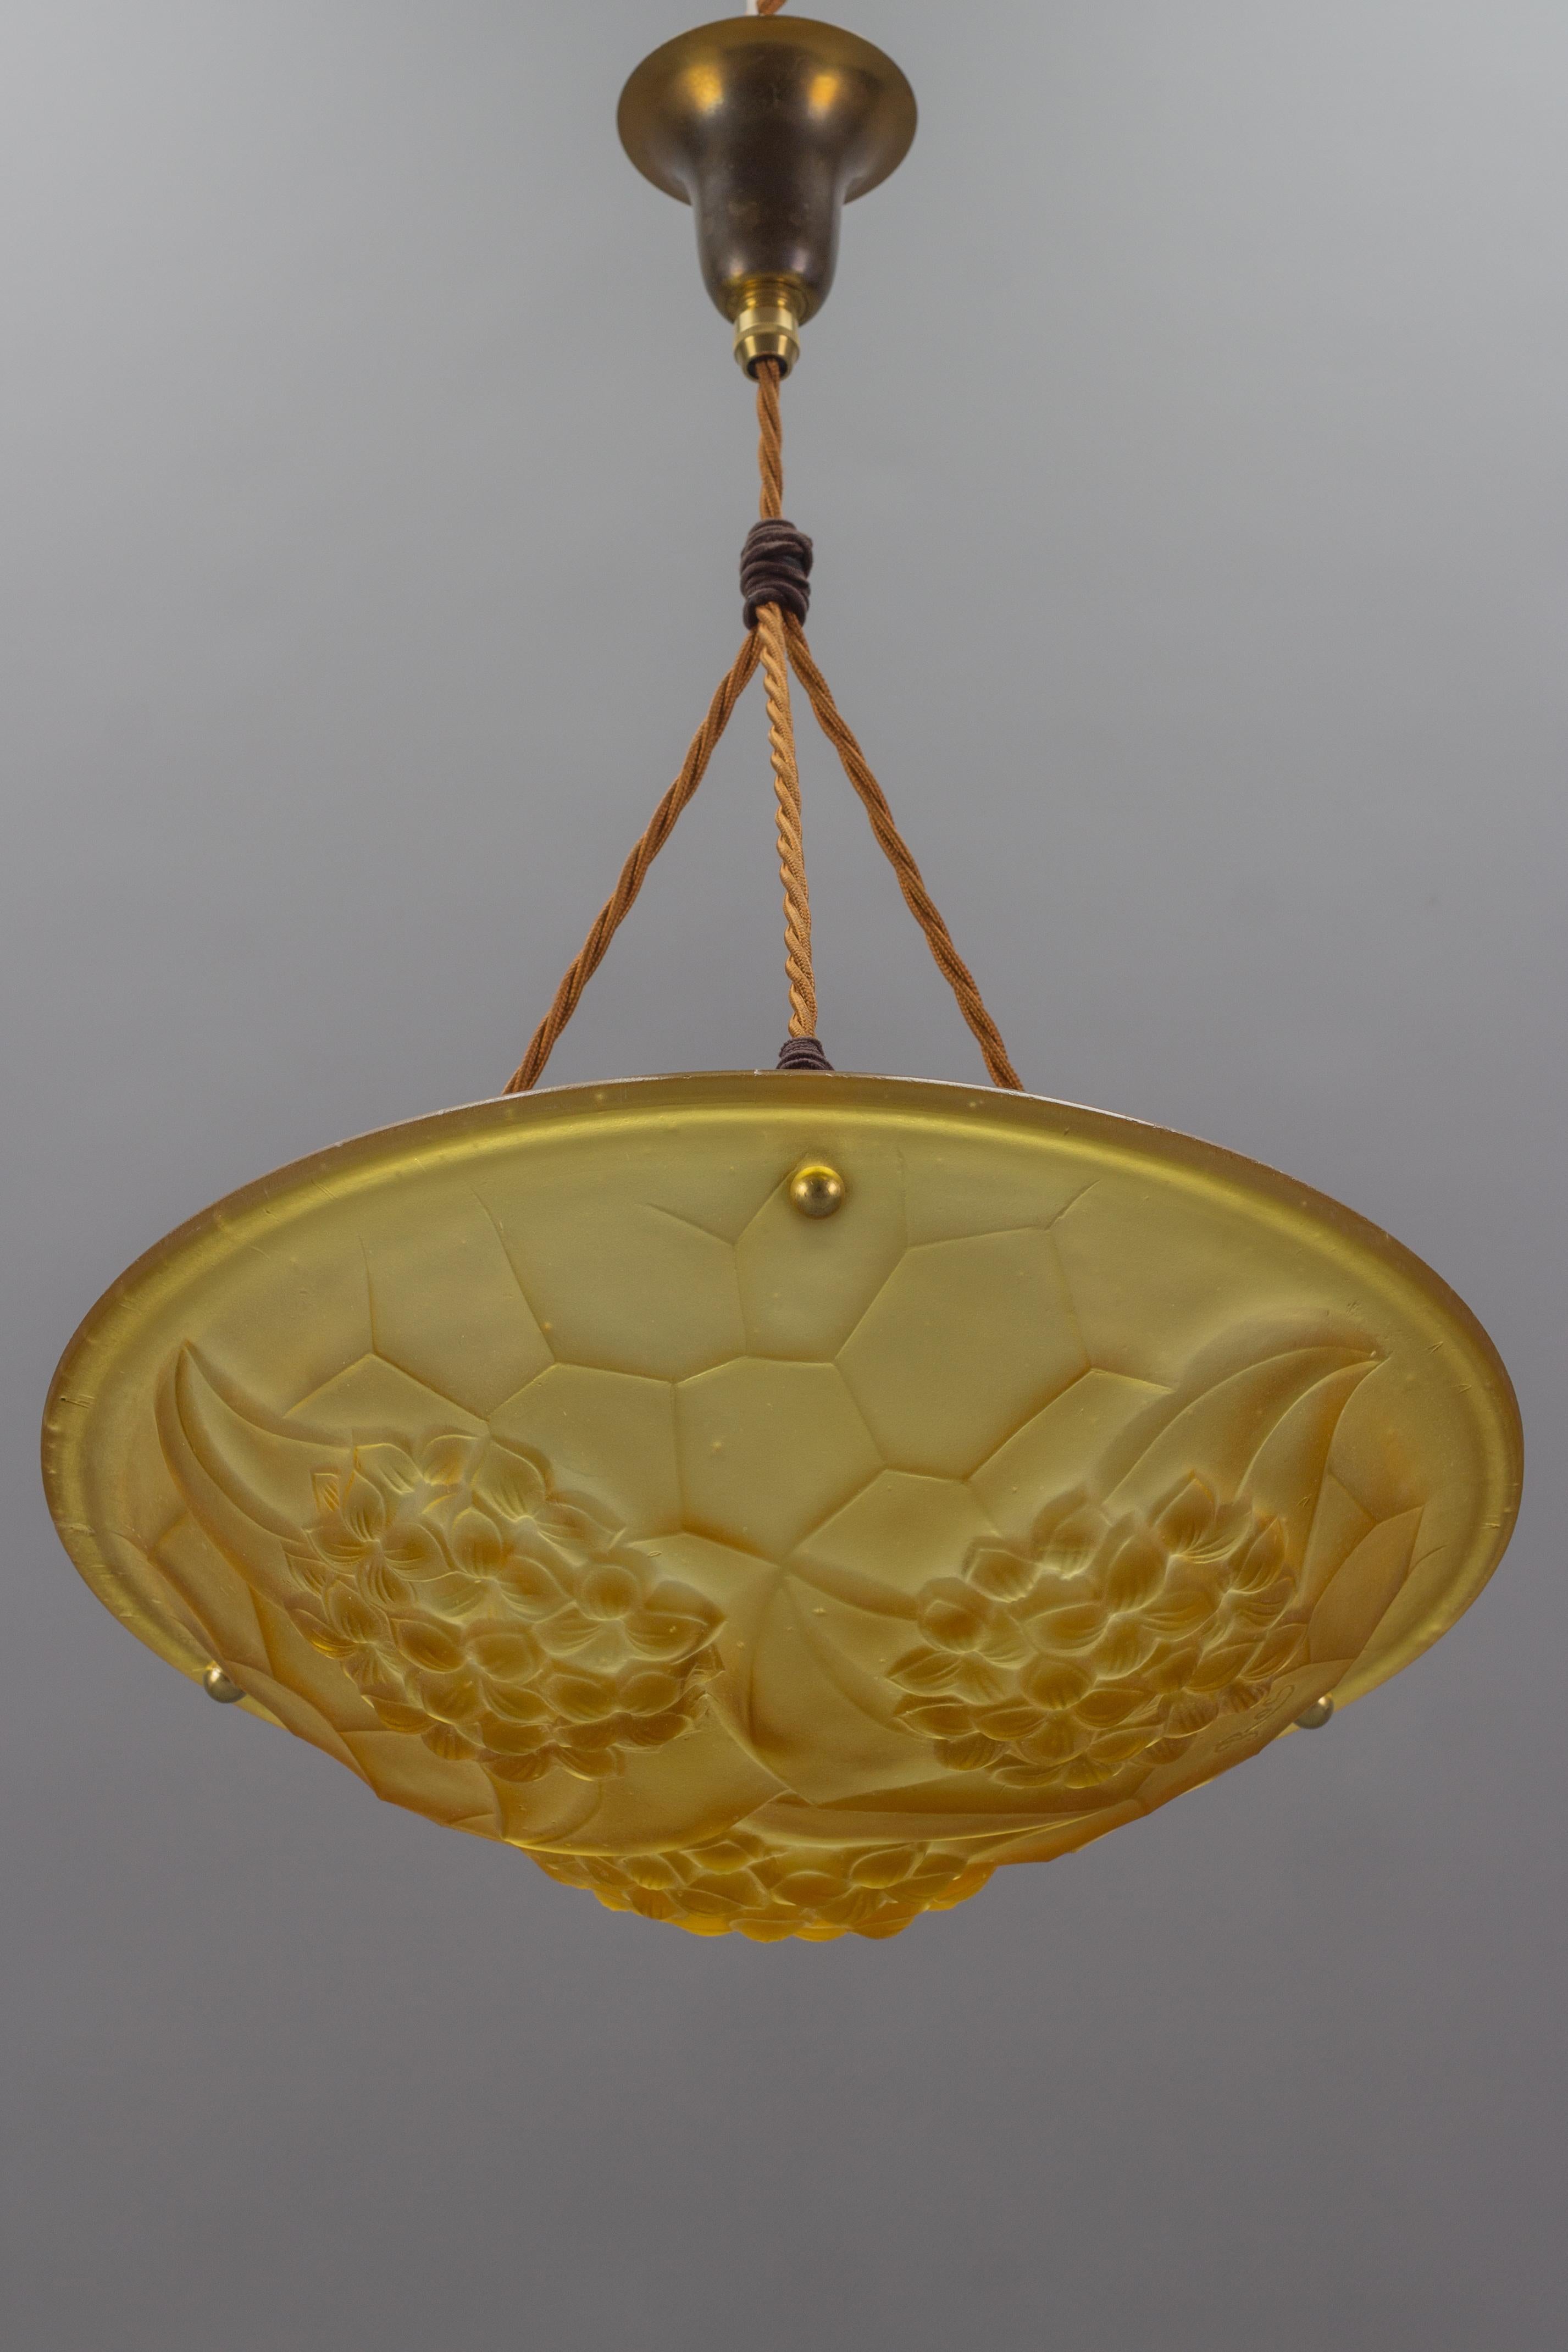 Beautiful French Art Deco period frosted molded glass shade in amber color with a floral and geometric design, signed ROS, by David Gueron for Cristalleries de Compiègne. Numbered with 706.
Suspended by three ropes with a brass canopy on the